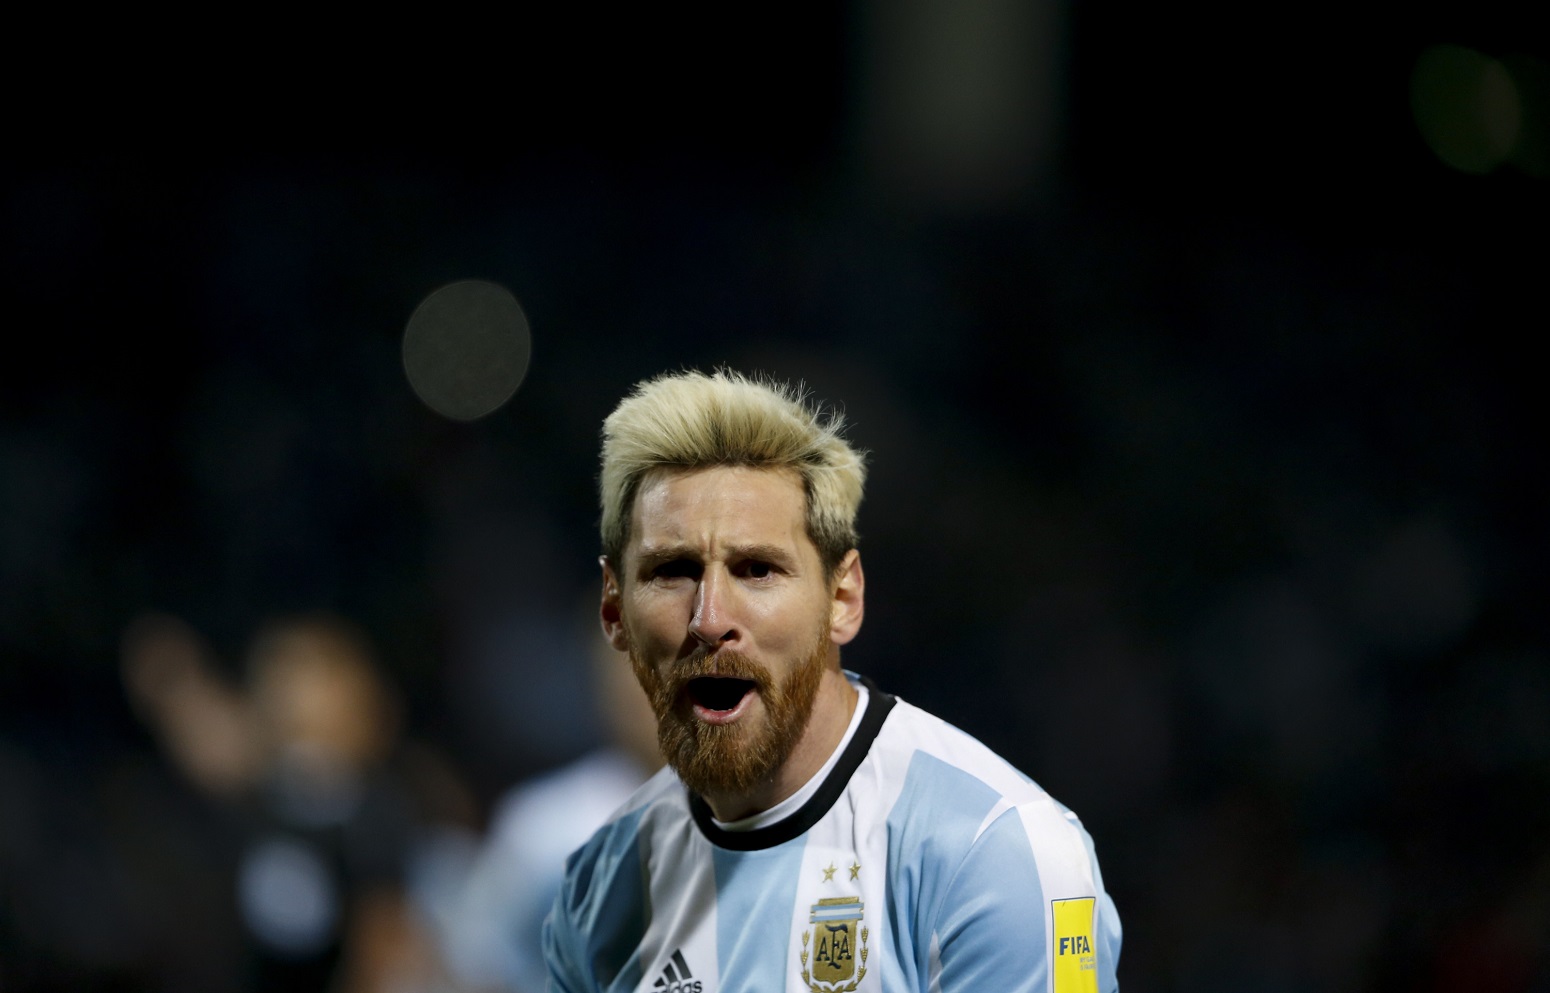 MENDOZA, ARGENTINA - SEPTEMBER 01: Lionel Messi of Argentina celebrates after scoring the first goal of his team during a match between Argentina and Uruguay as part of FIFA 2018 World Cup Qualifiers at Malvinas Argentinas Stadium on September 01, 2016 in Mendoza, Argentina. (Photo by Gabriel Rossi/LatinContent/Getty Images)